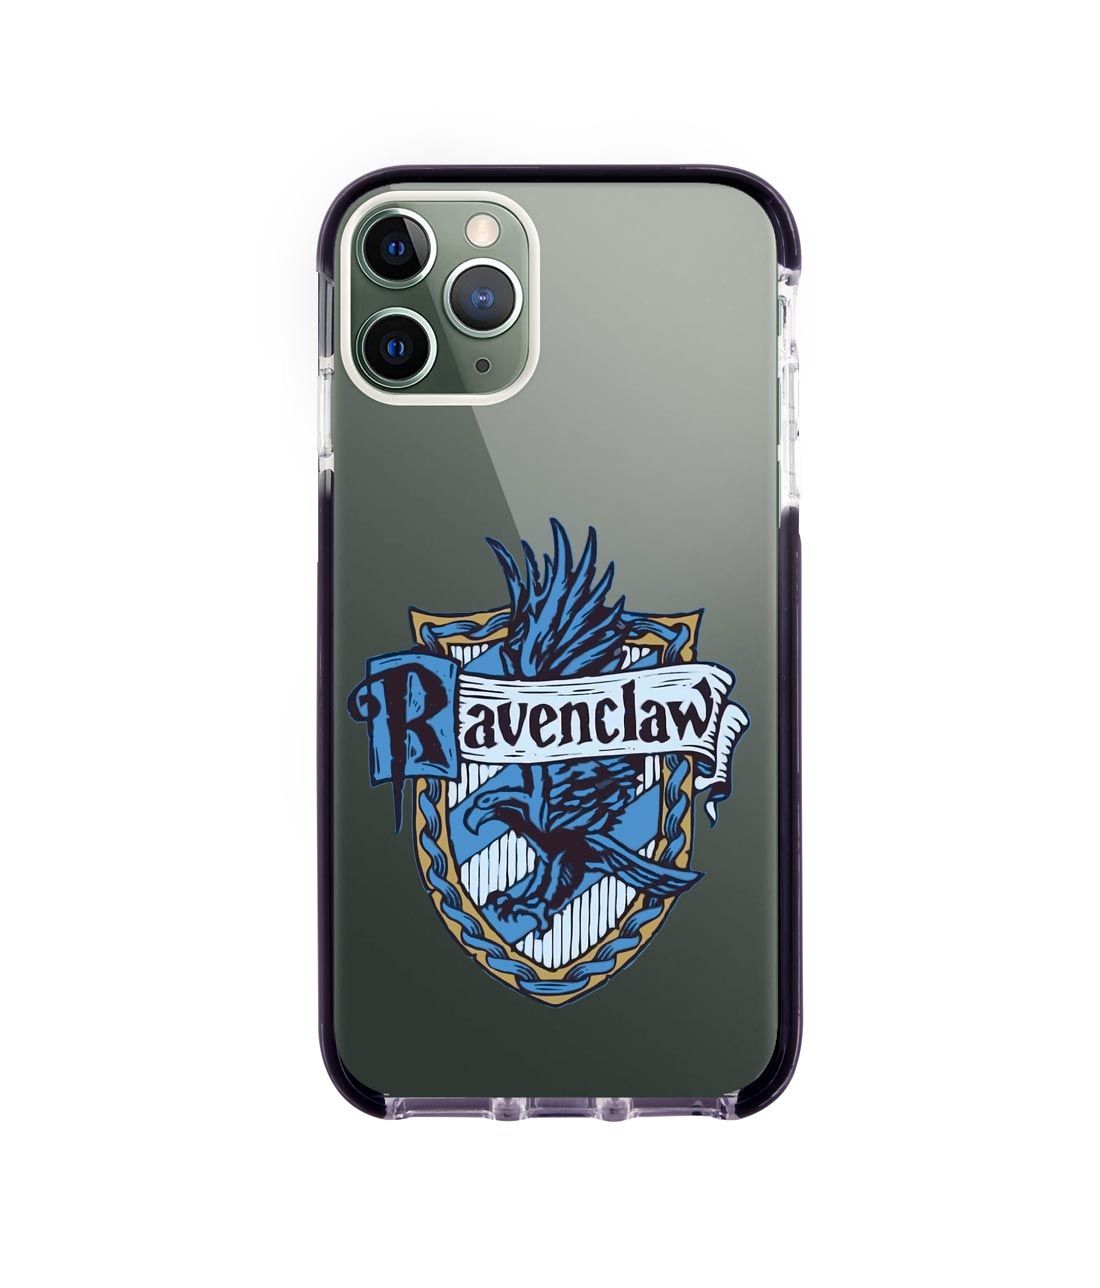 Crest Ravenclaw - Extreme Phone Case for iPhone 11 Pro